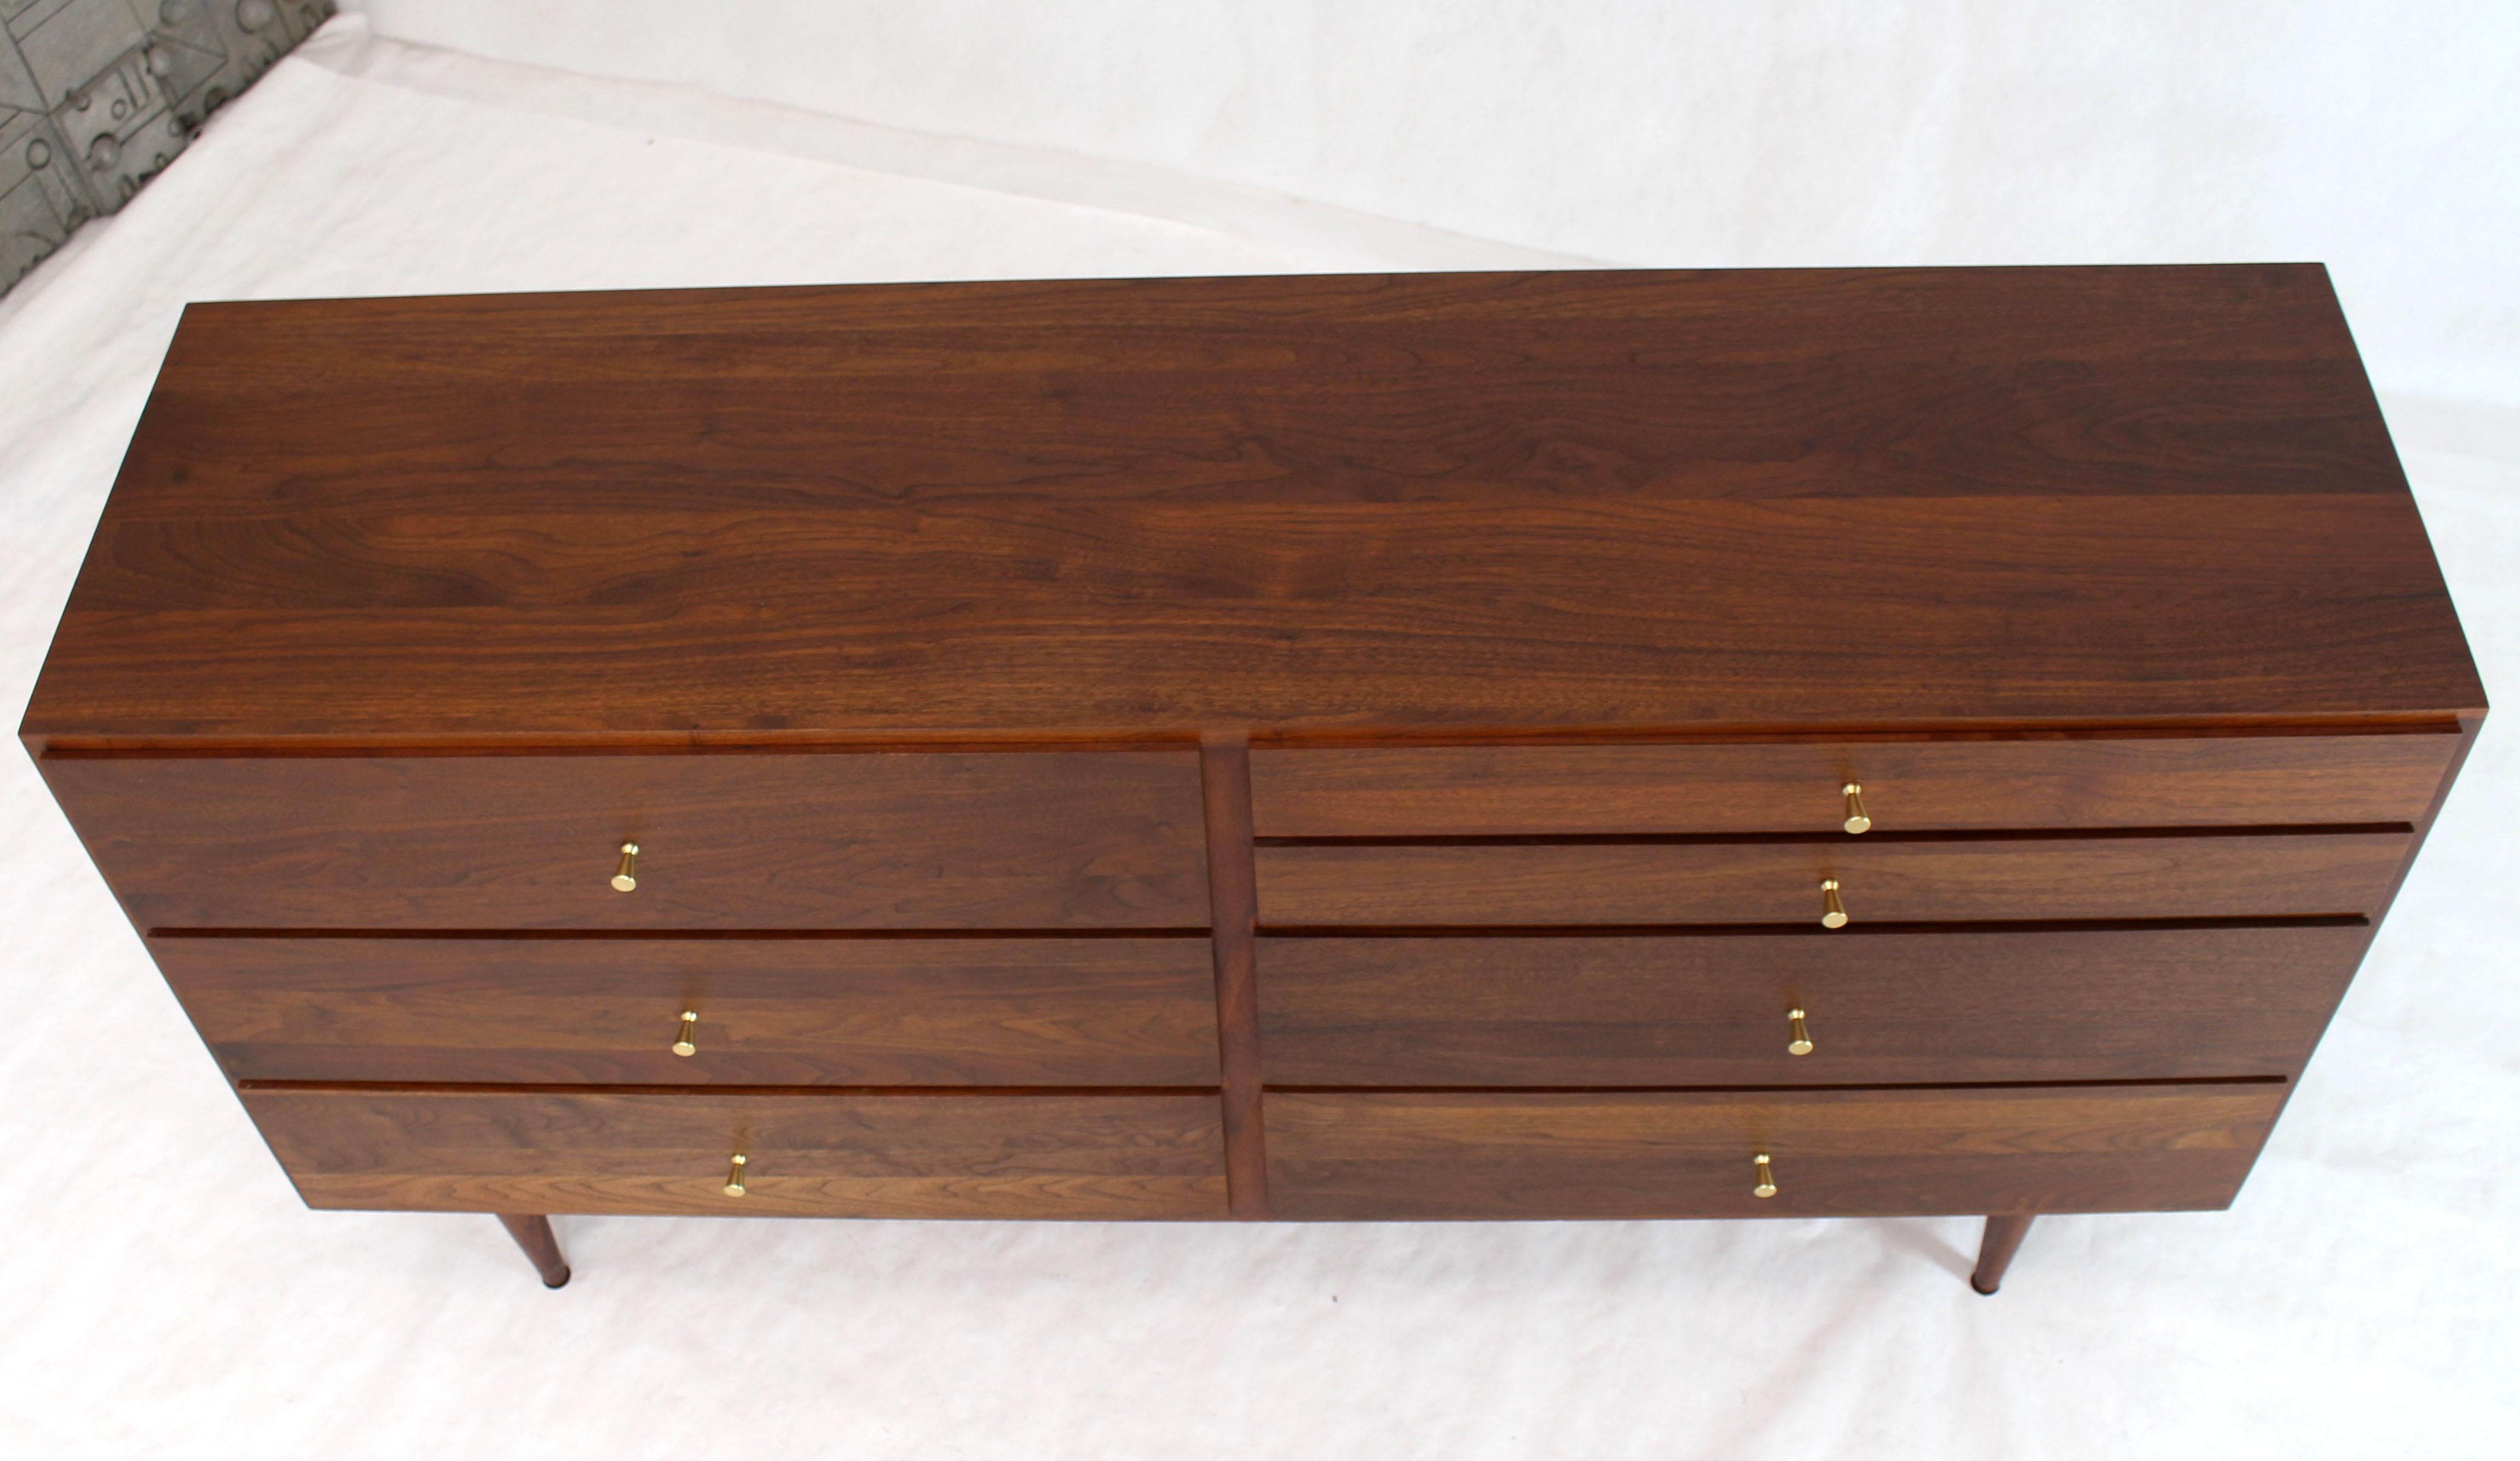 Solid Oiled Walnut Seven Drawers Double Dresser Brass Pulls Tapered Legs 4